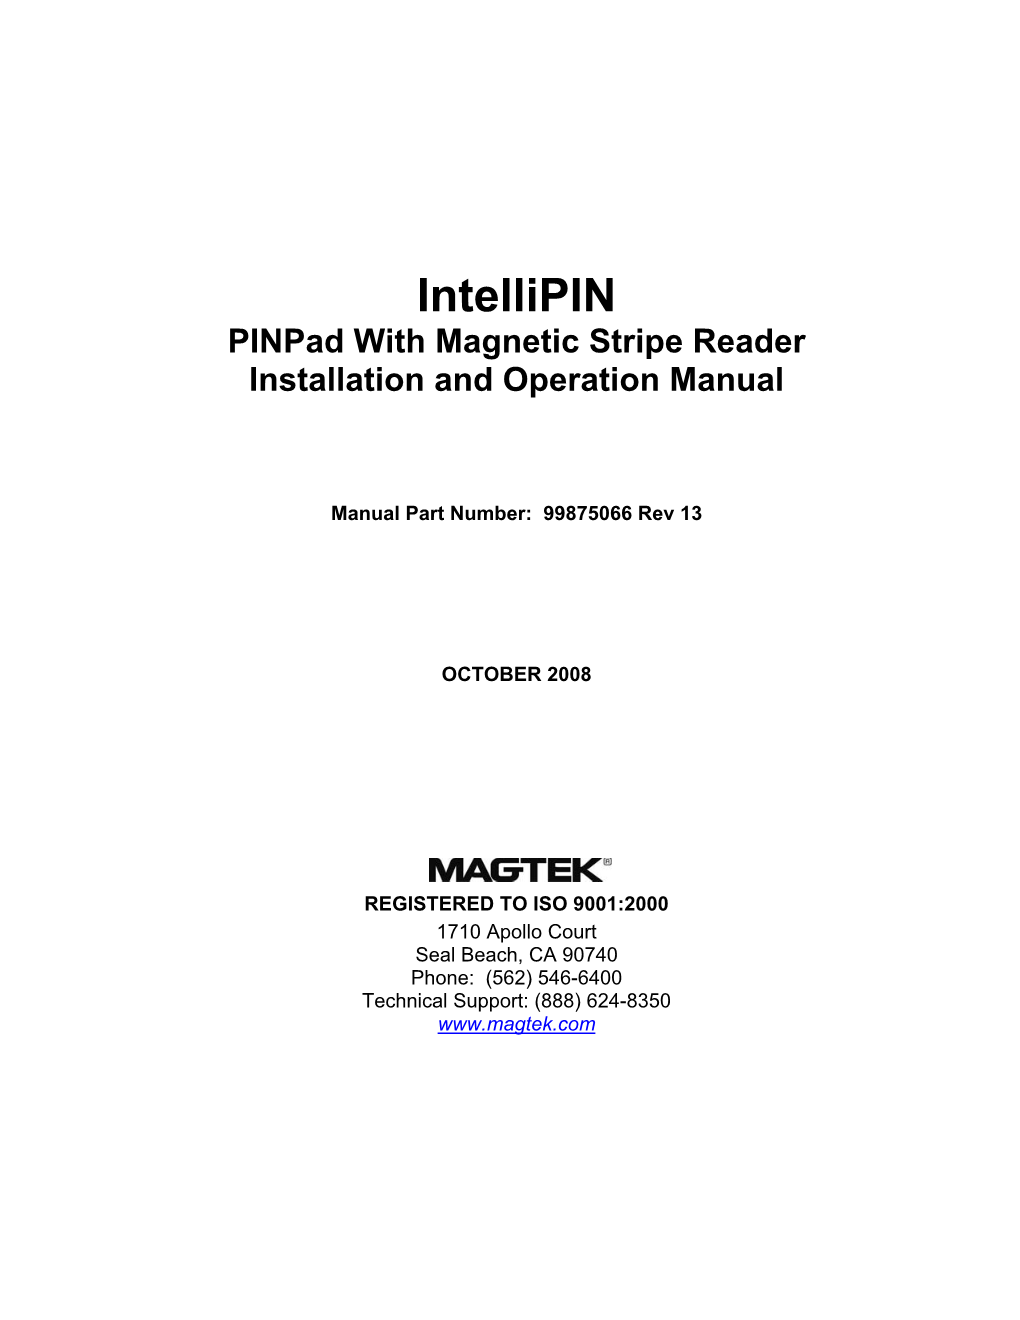 Intellipin, Pinpad with Magnetic Stripe Reader, Installation And